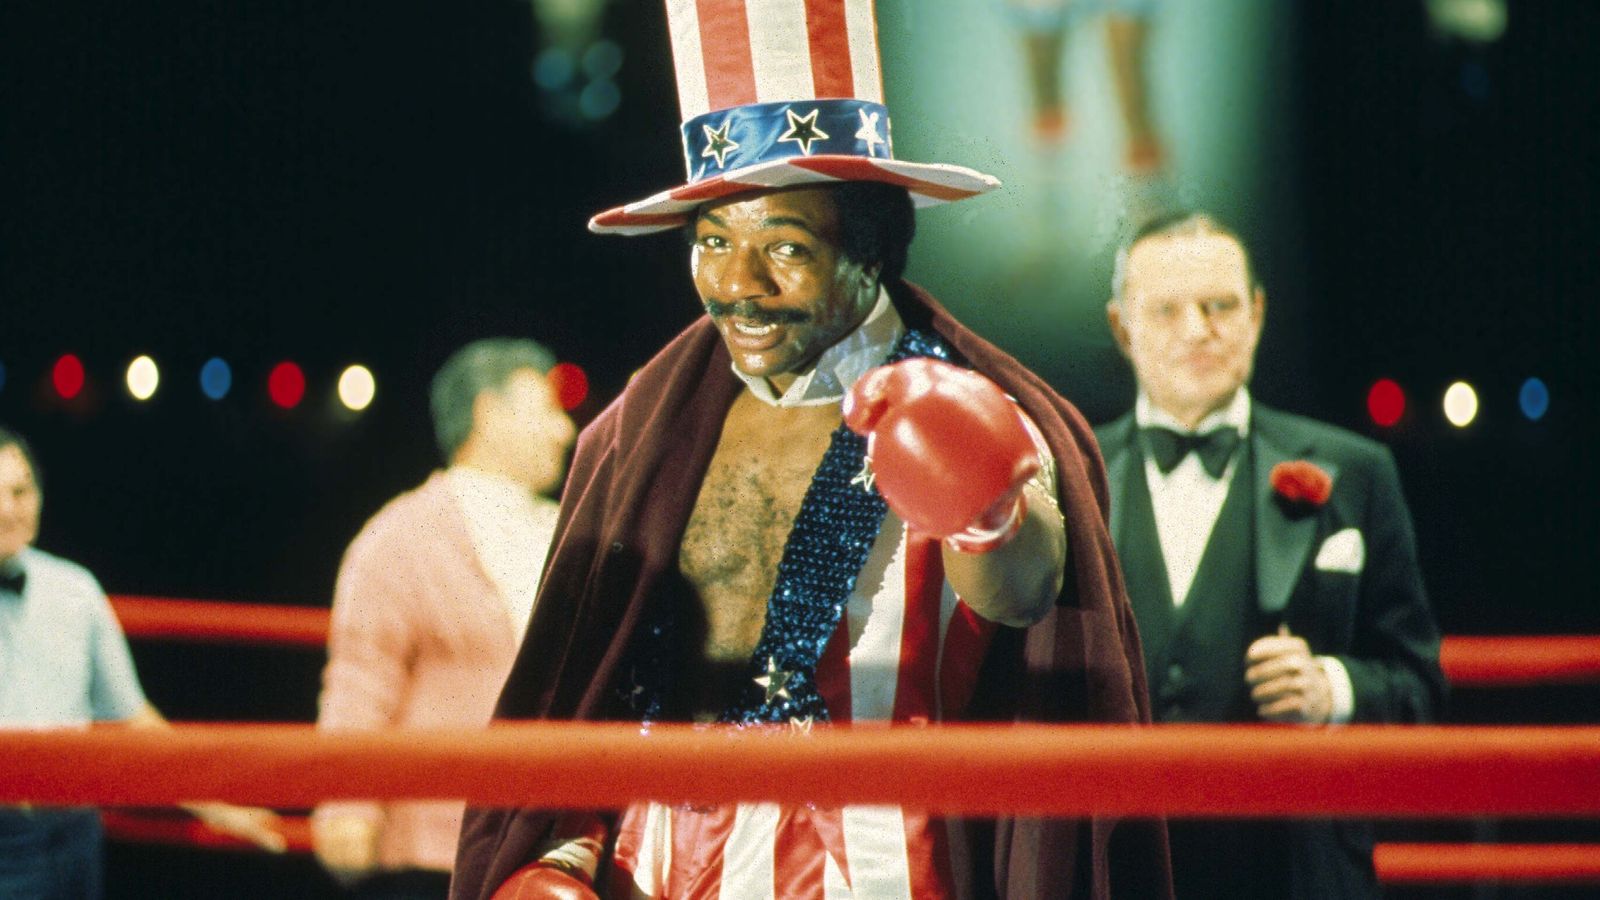 Carl Weathers, Apollo Creed in 'Rocky' films, passes away at 76